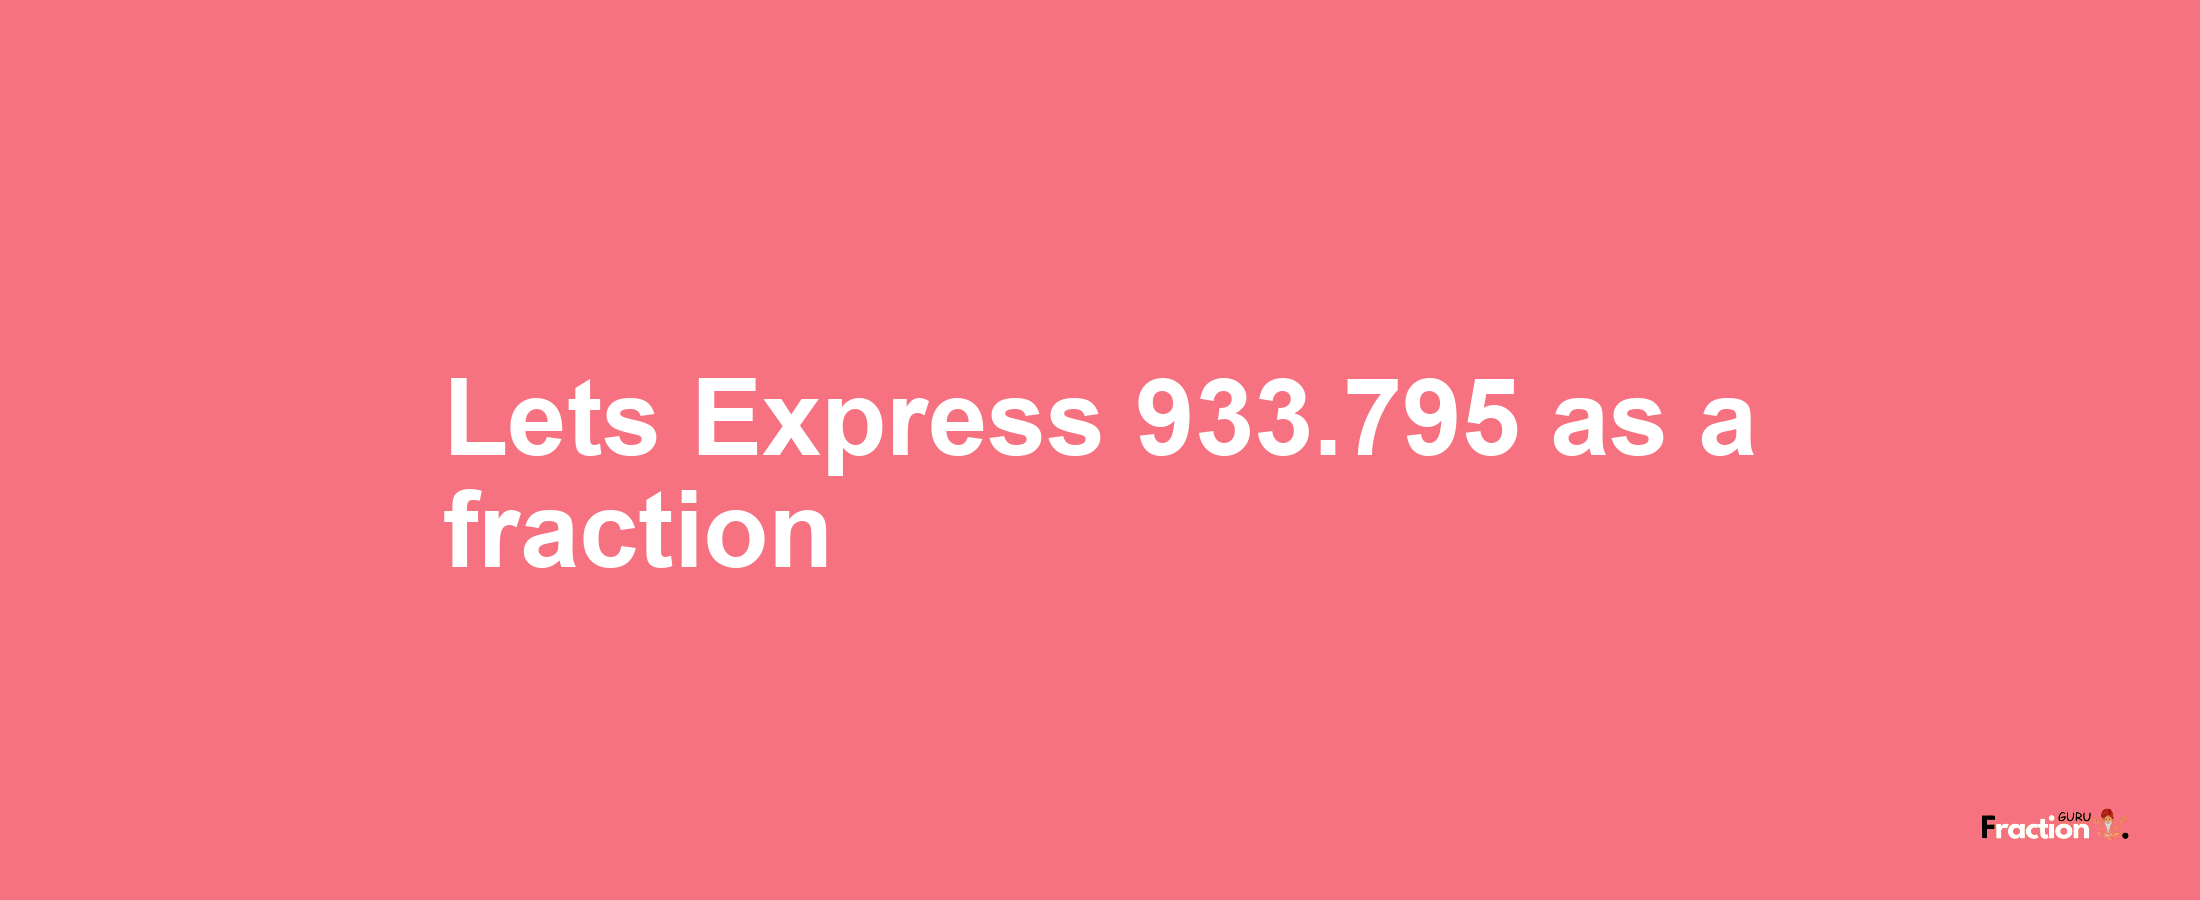 Lets Express 933.795 as afraction